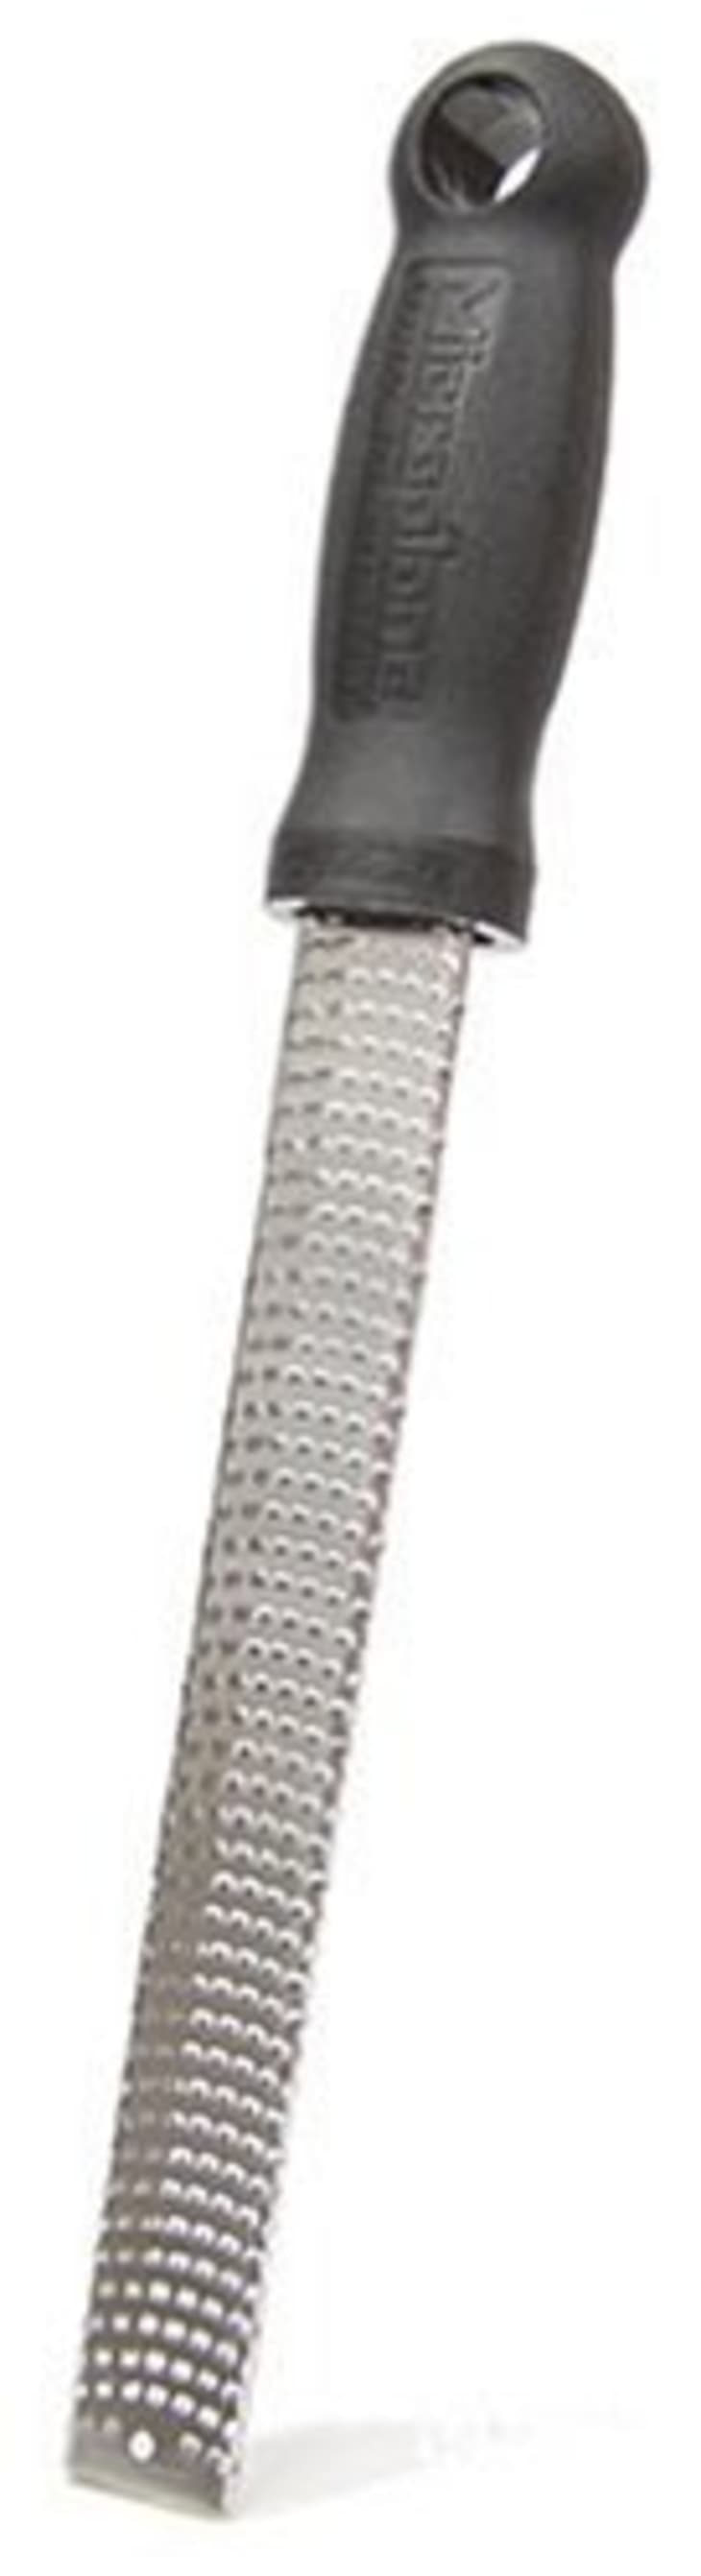 Product Image: Microplane Classic Zester/Grater